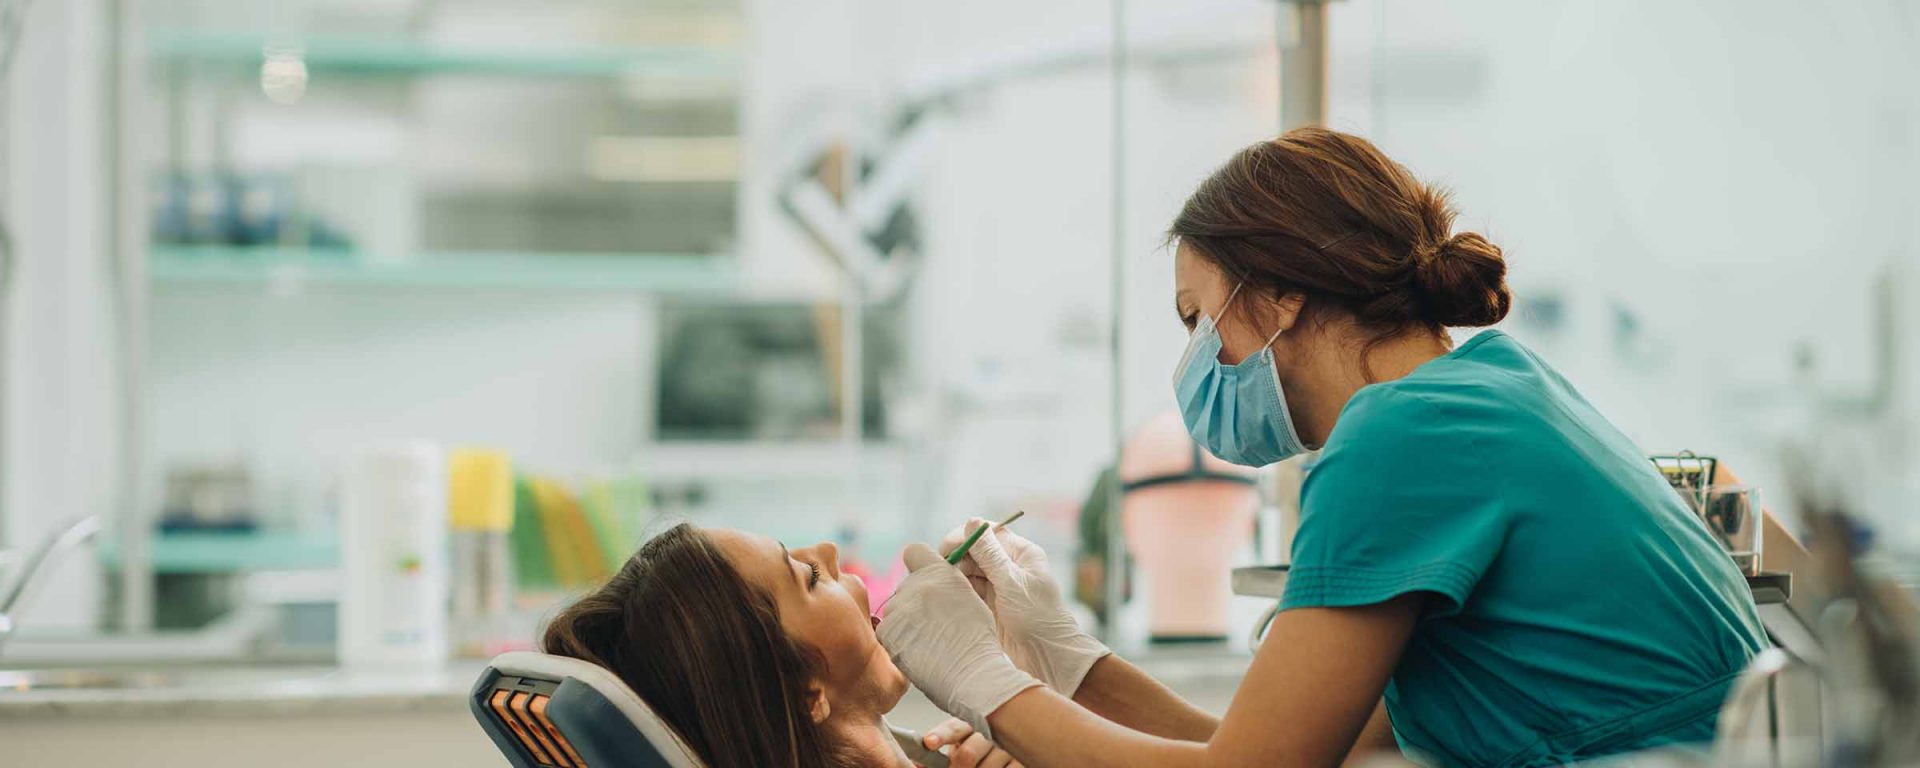 Dentist working on a woman's mouth